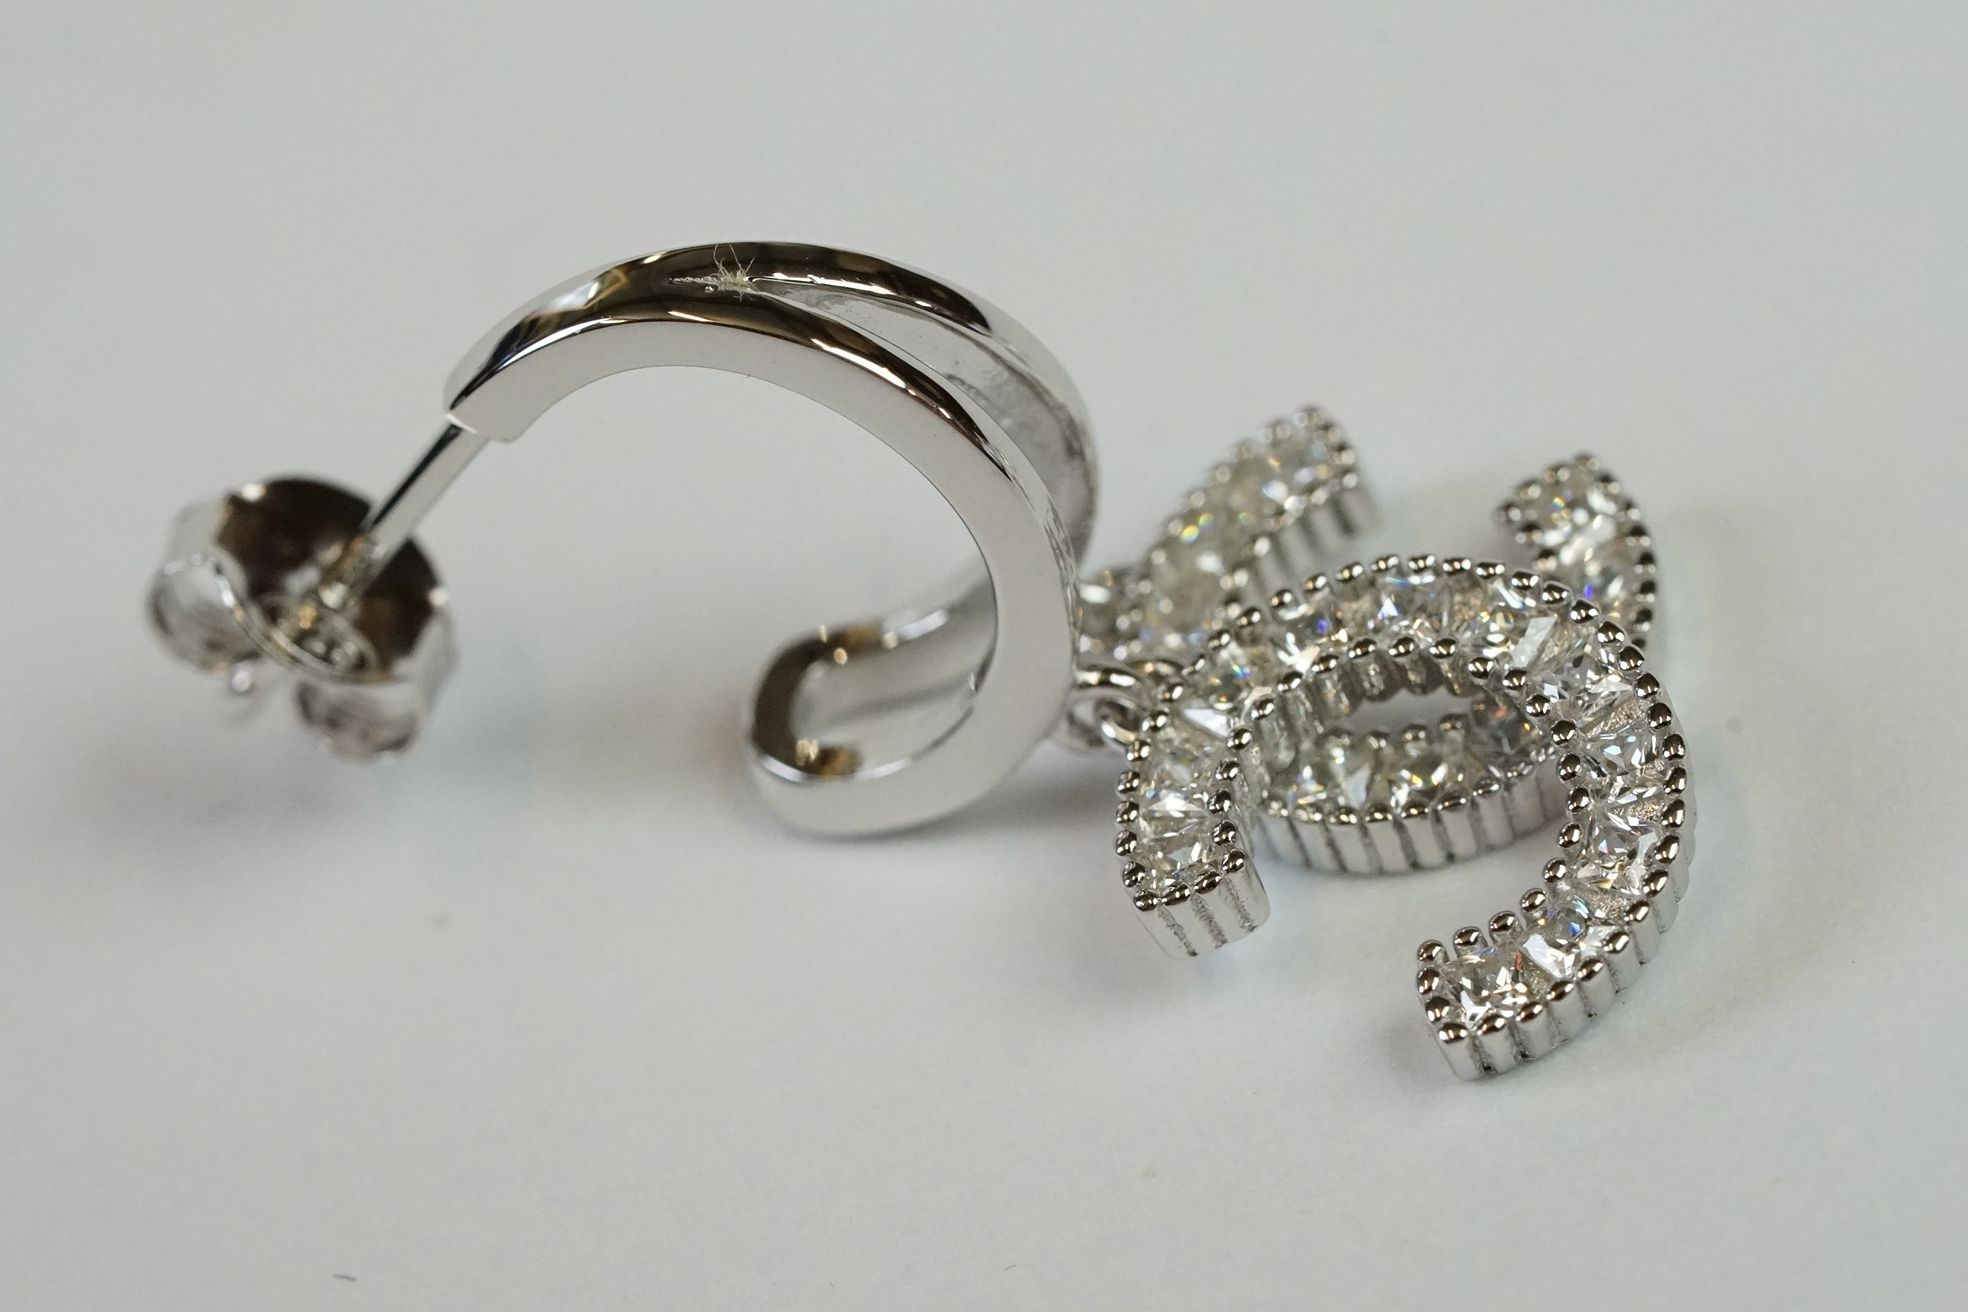 Pair of Silver and CZ designer style Stud Earrings - Image 3 of 5